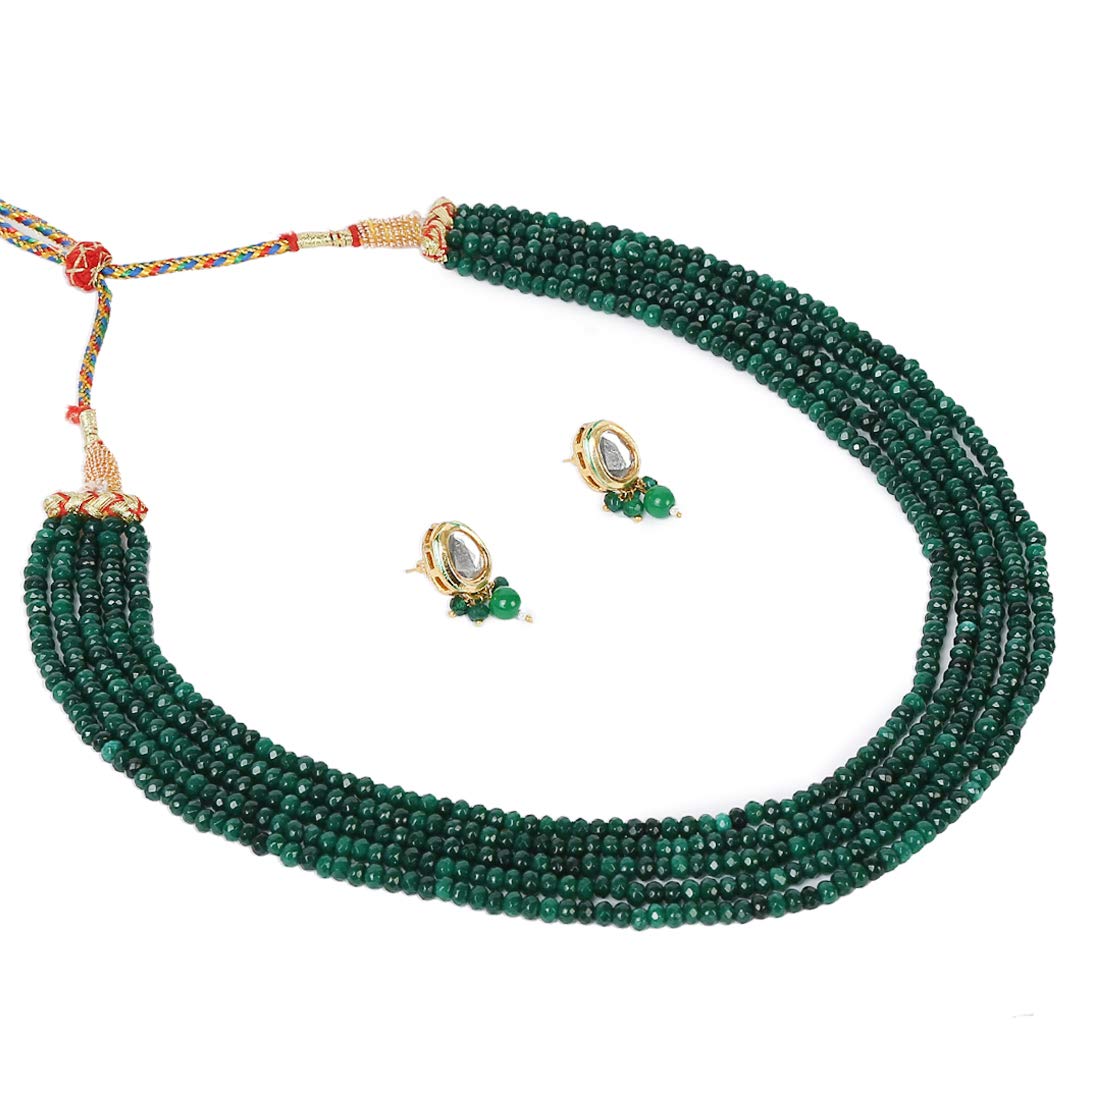 Yellow Chimes Classic Design Five Layers Emerald Green Onyx Stone Beads Semi Precious Gemstone Necklace Set with Earrings for Women & Girls